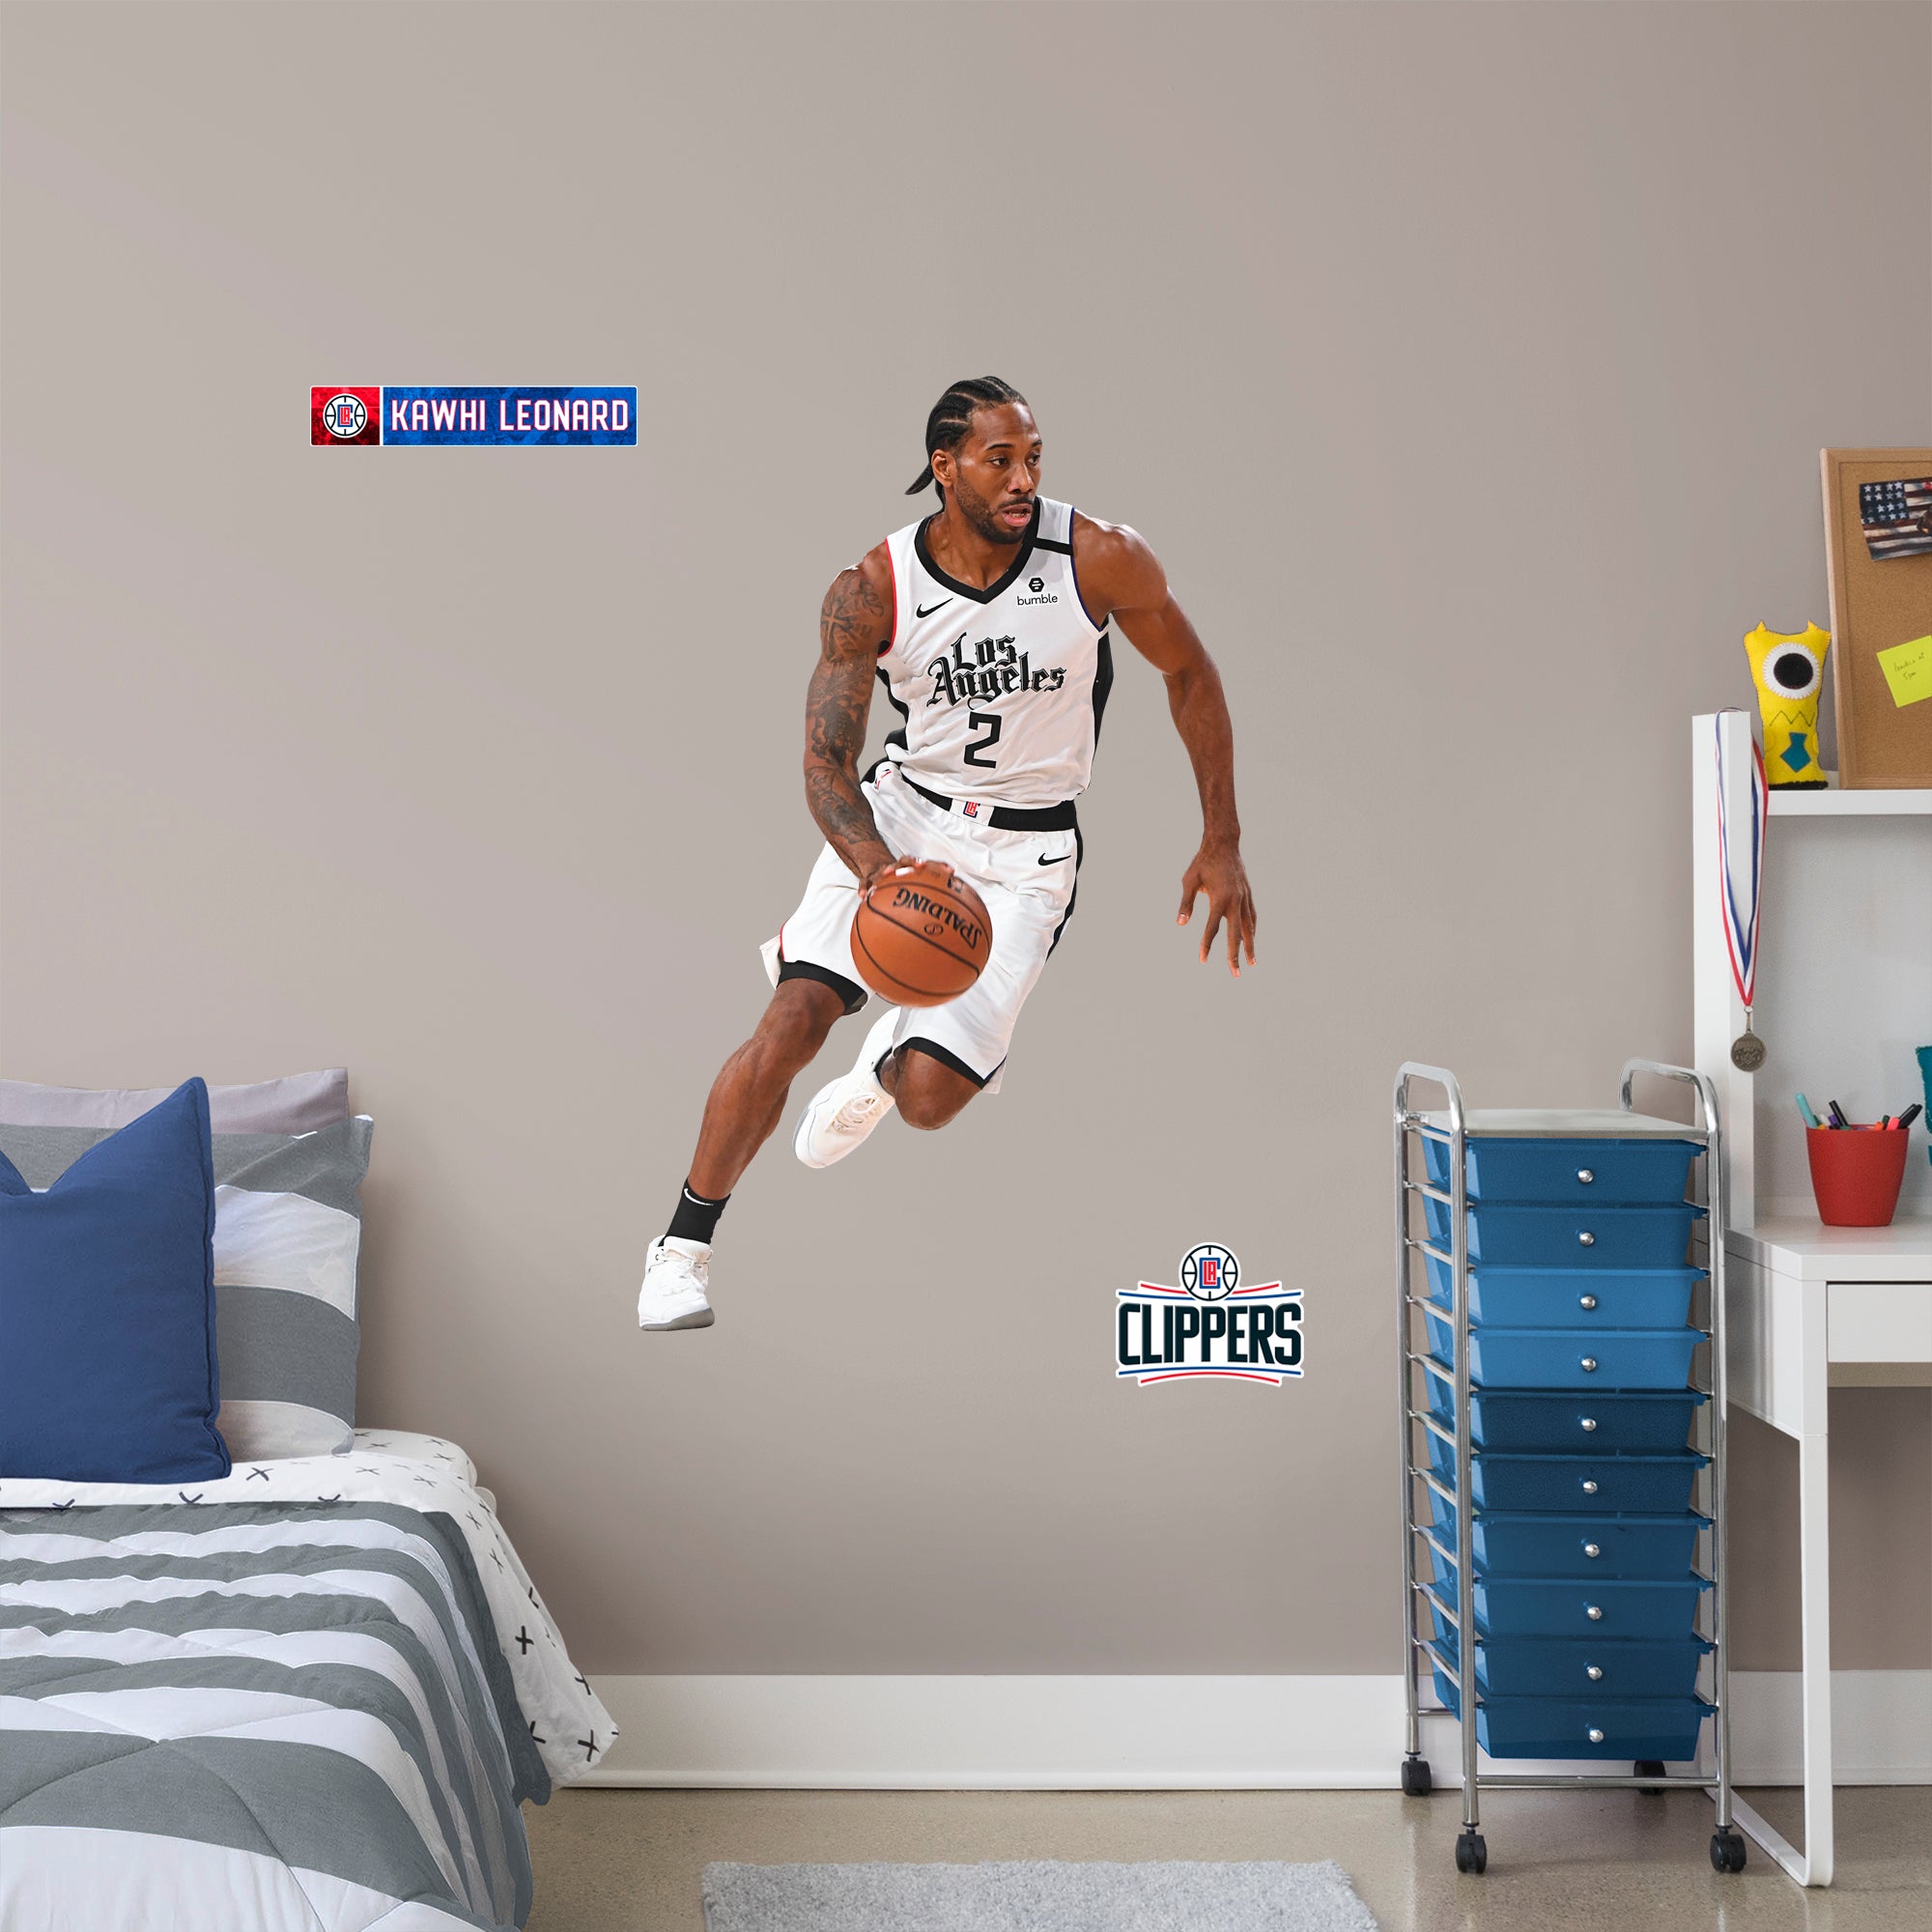 Kawhi Leonard 2020 Old English Jersey RealBig - Officially Licensed NBA Removable Wall Decal Giant Athlete + 2 Decals (33"W x 51